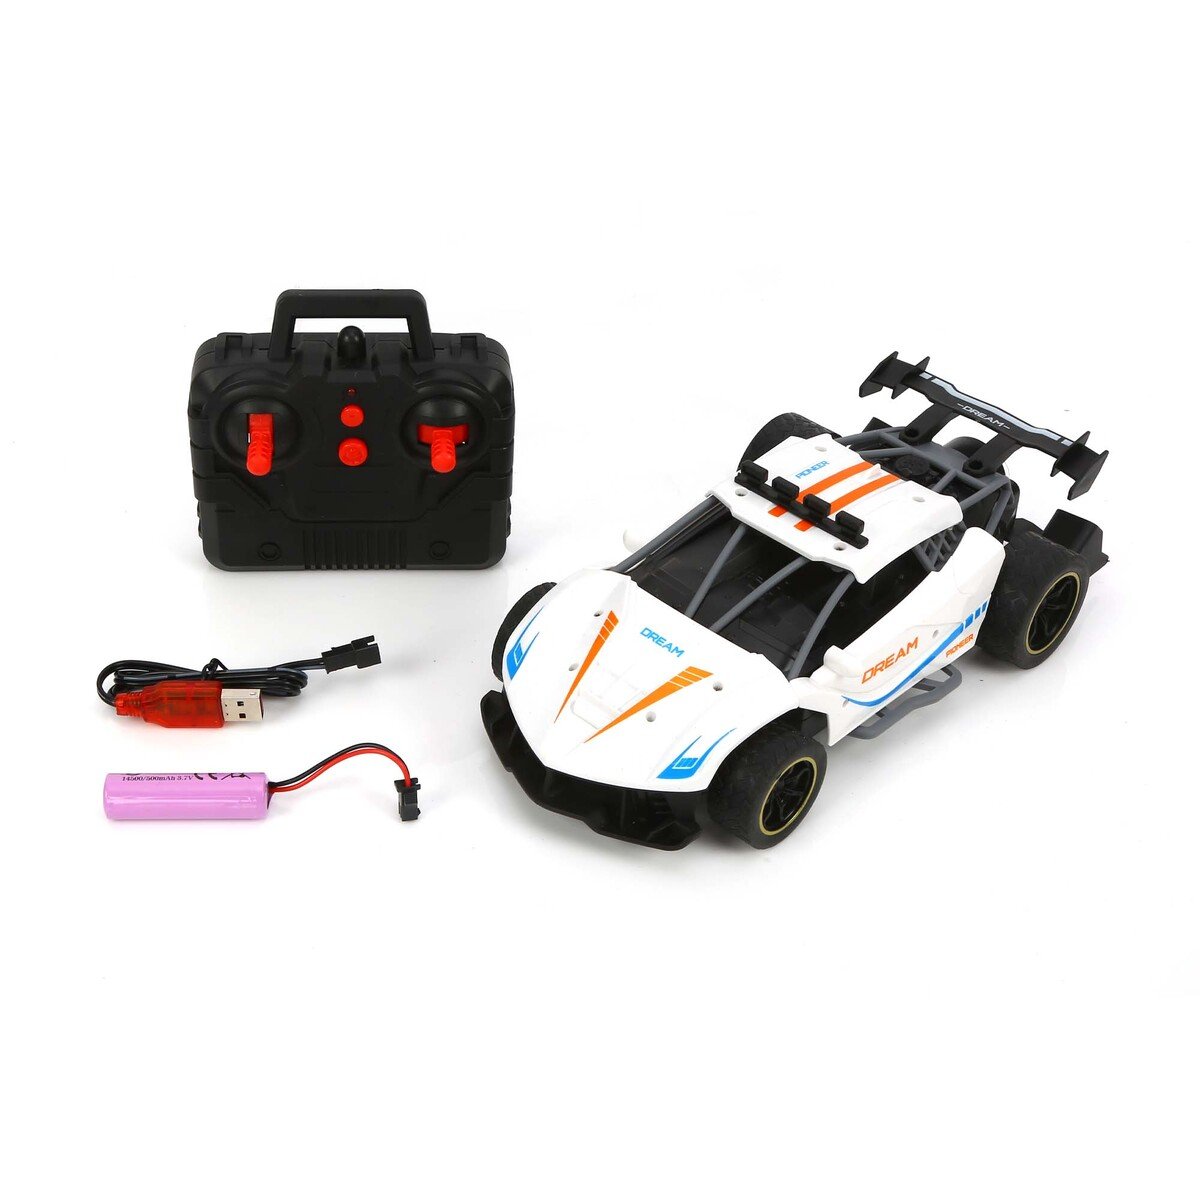 Skid Fusion Rechargeable Remote Control Spray Runner Car Scale 1:16 6316-5